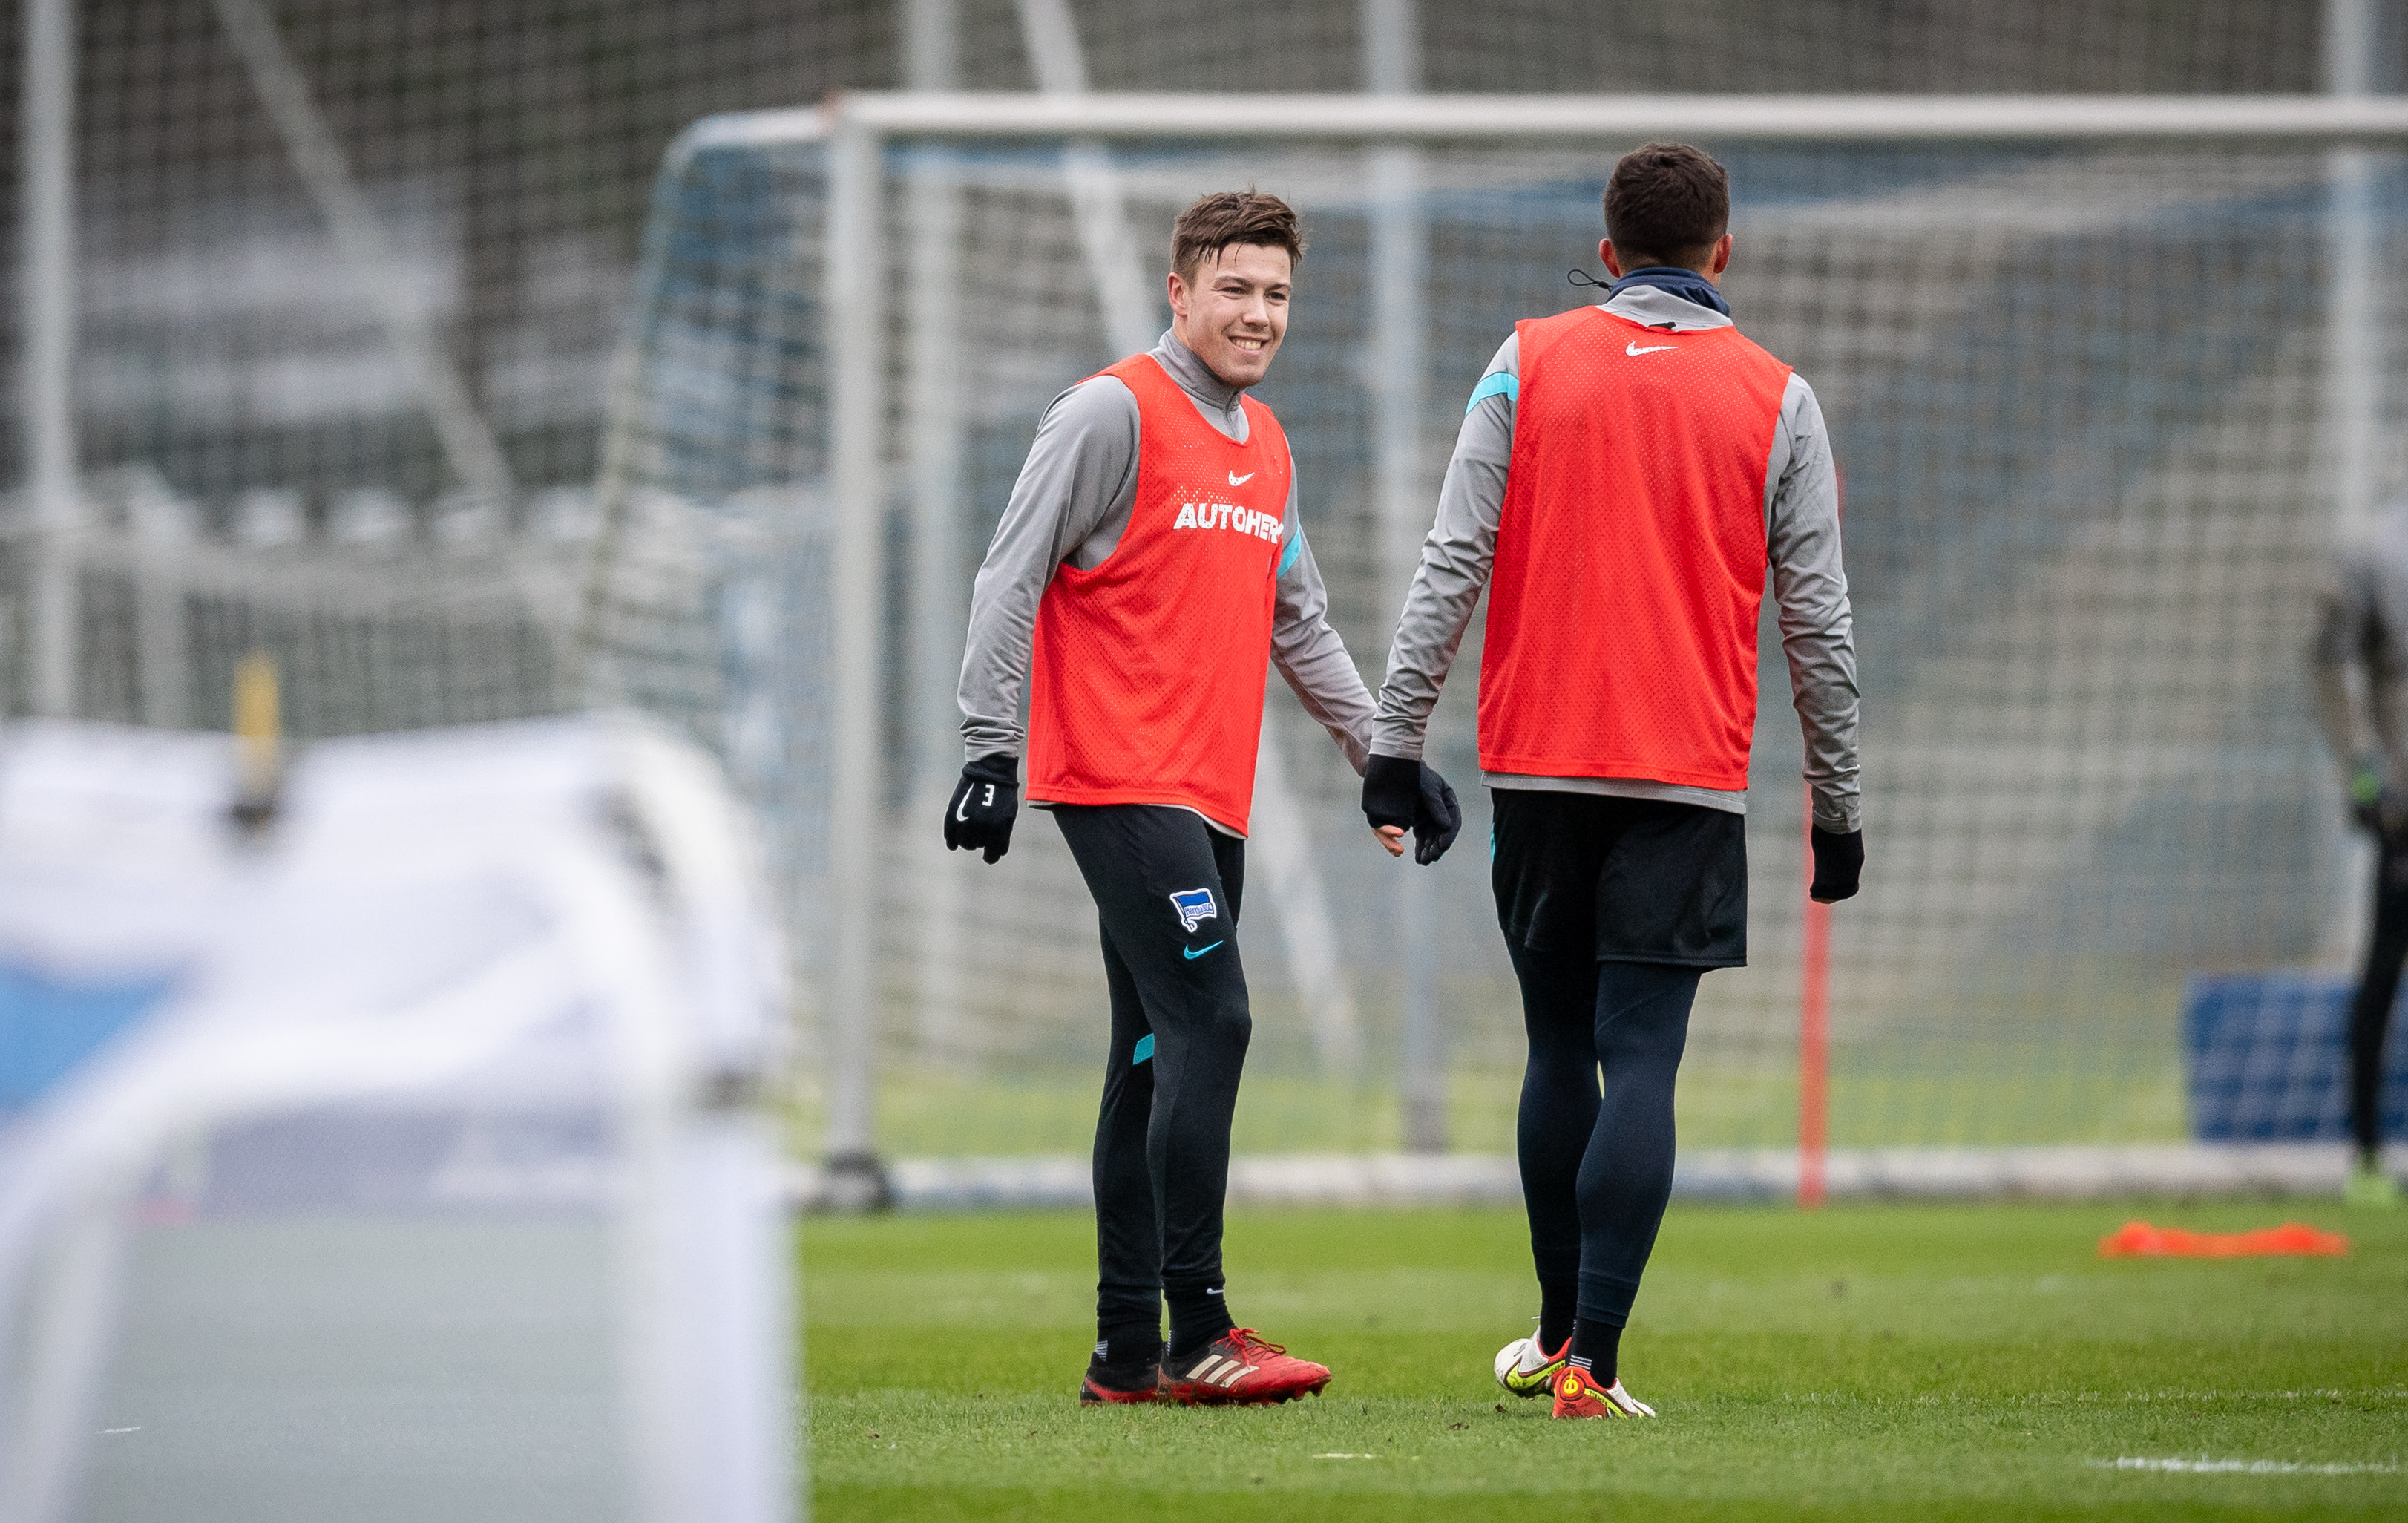 The two new additions in action at training: Fredrik Bjørkan und Marc Oliver Kempf.